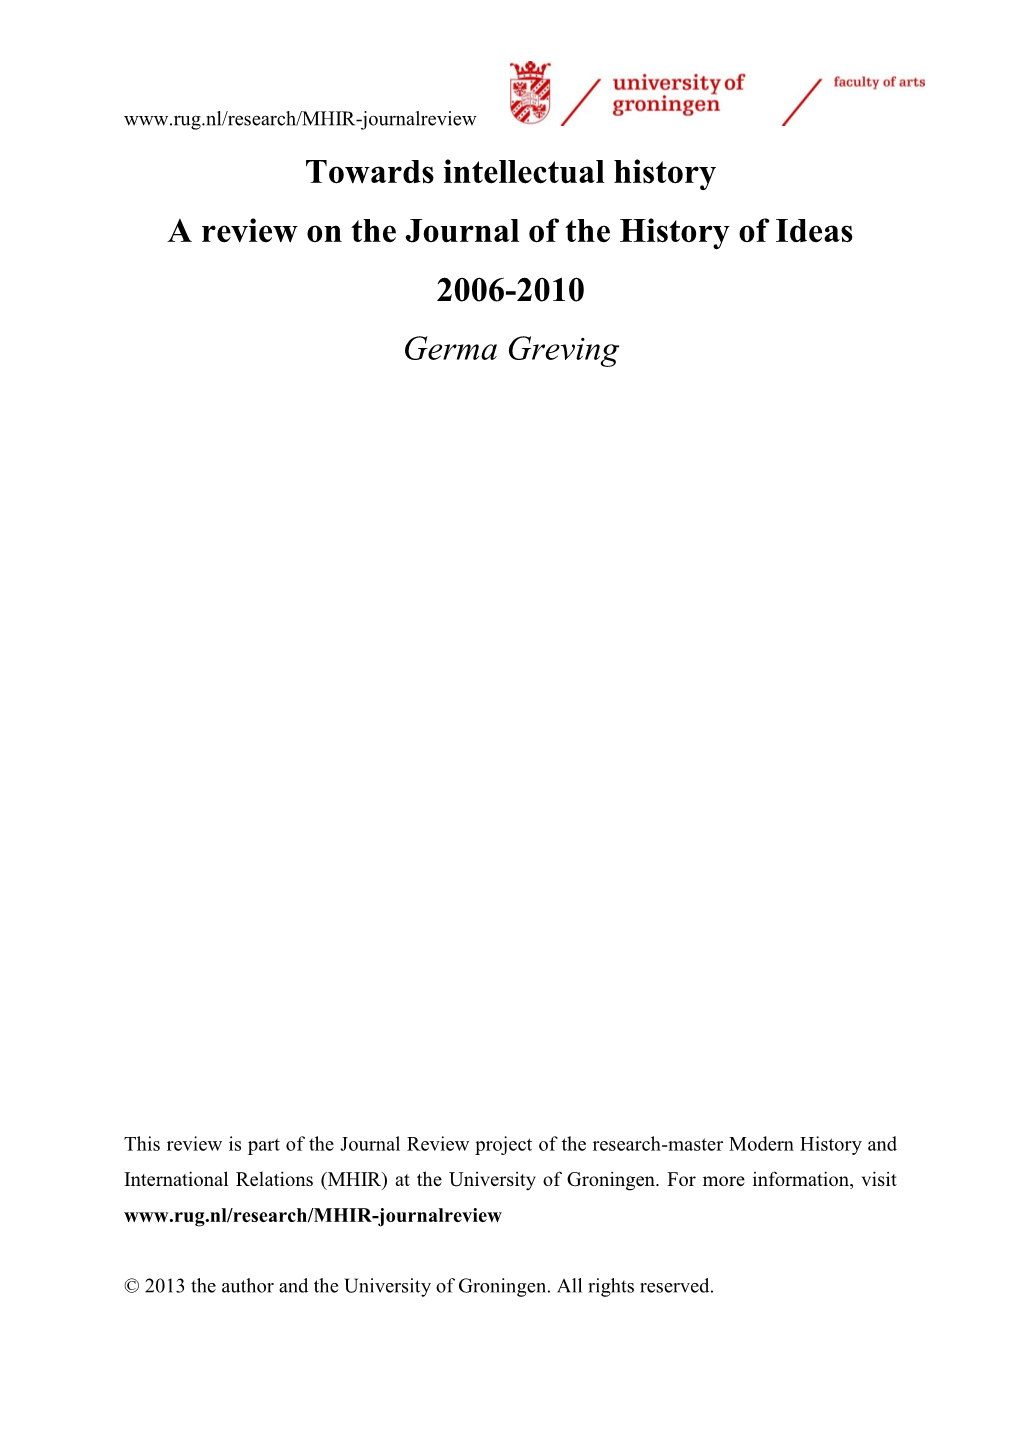 Journal of the History of Ideas 2006-2010 Germa Greving